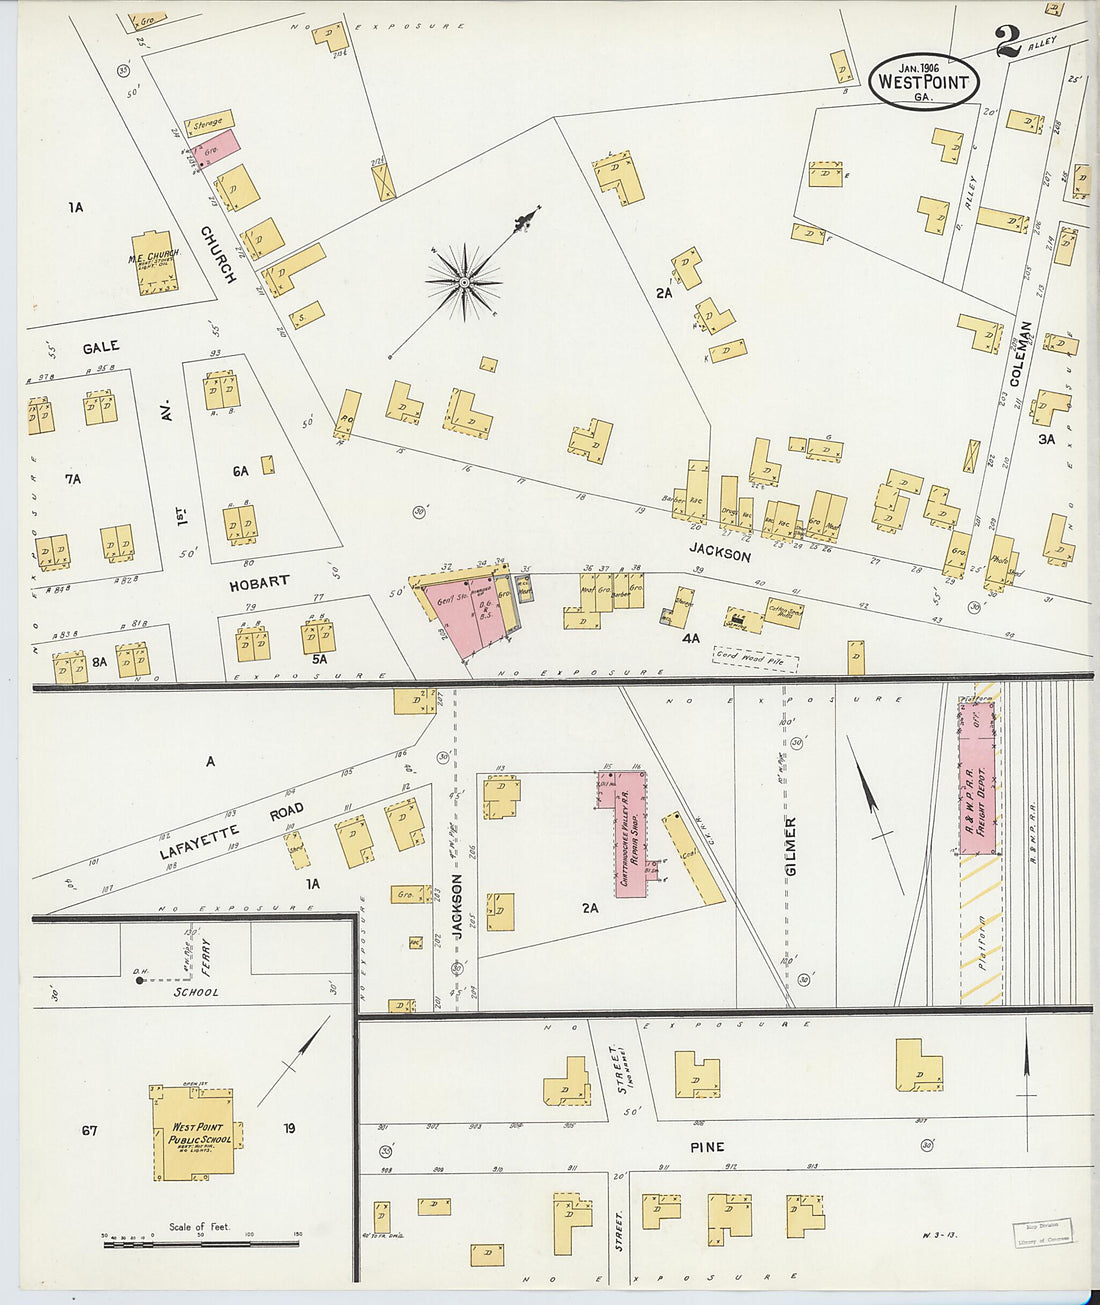 This old map of West Point, Troup County, Georgia was created by Sanborn Map Company in 1906